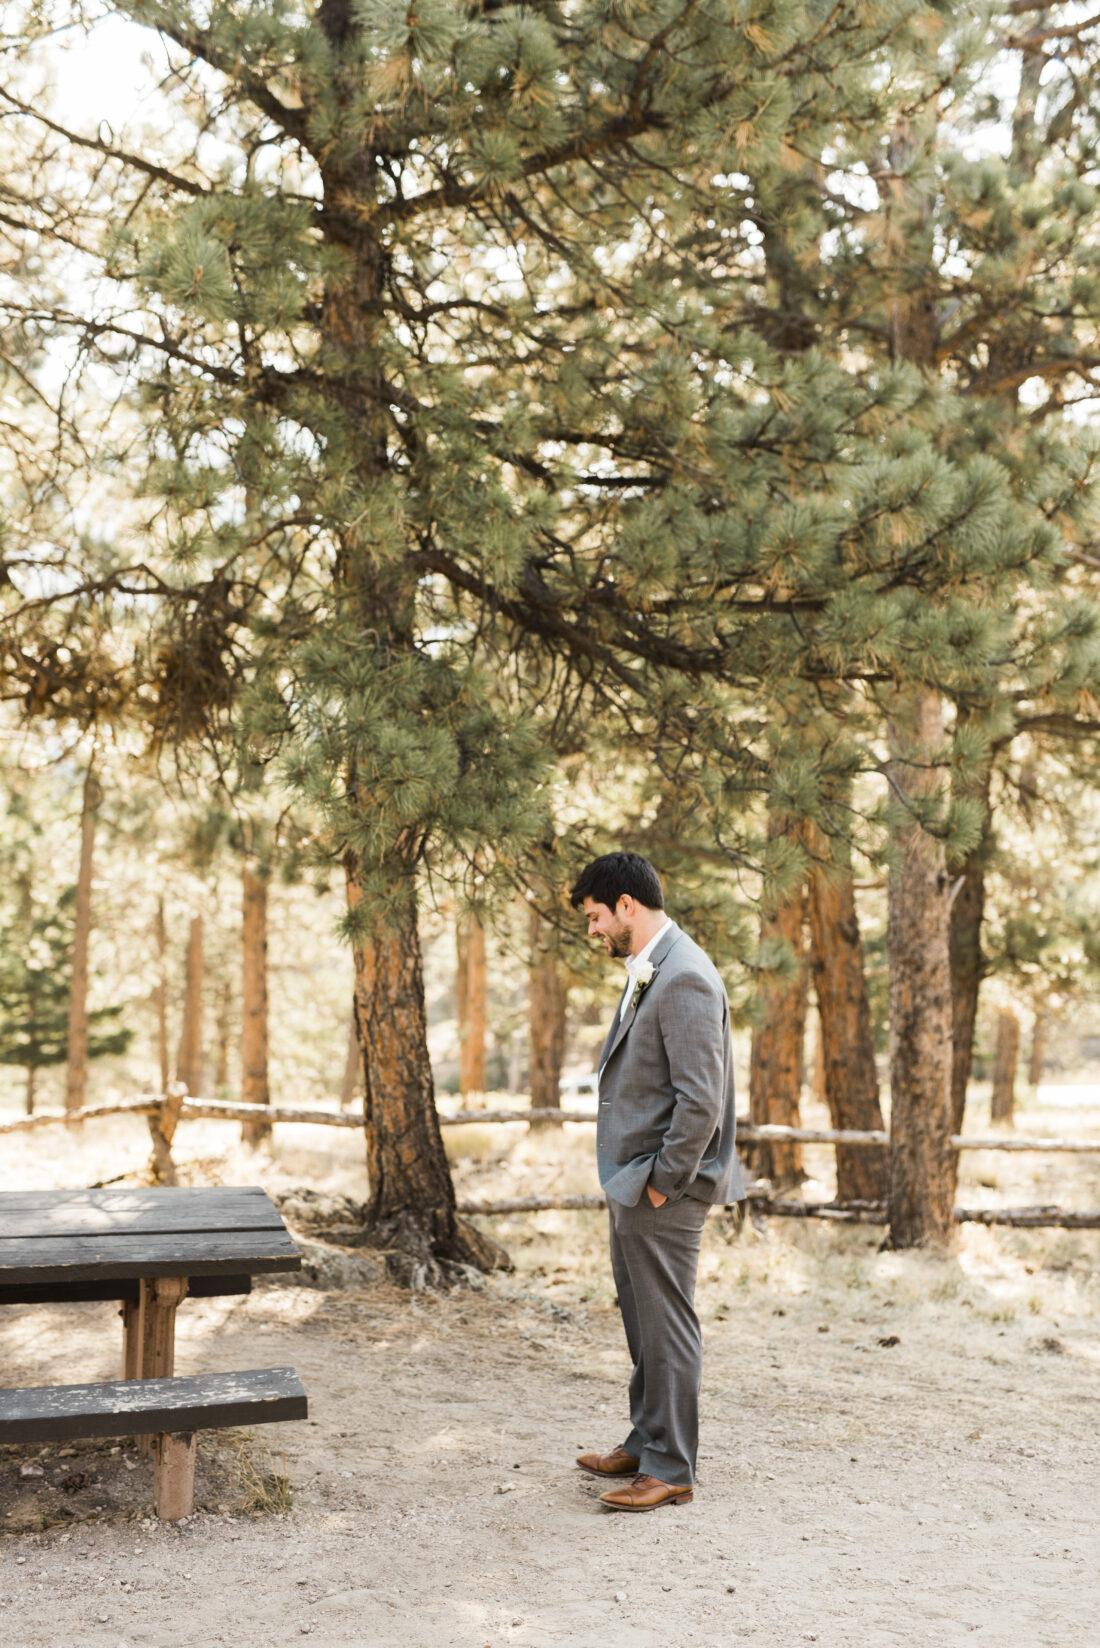 Flatirons Colorado Wedding with White Boots and Stunner Shades | Mountainside Bride